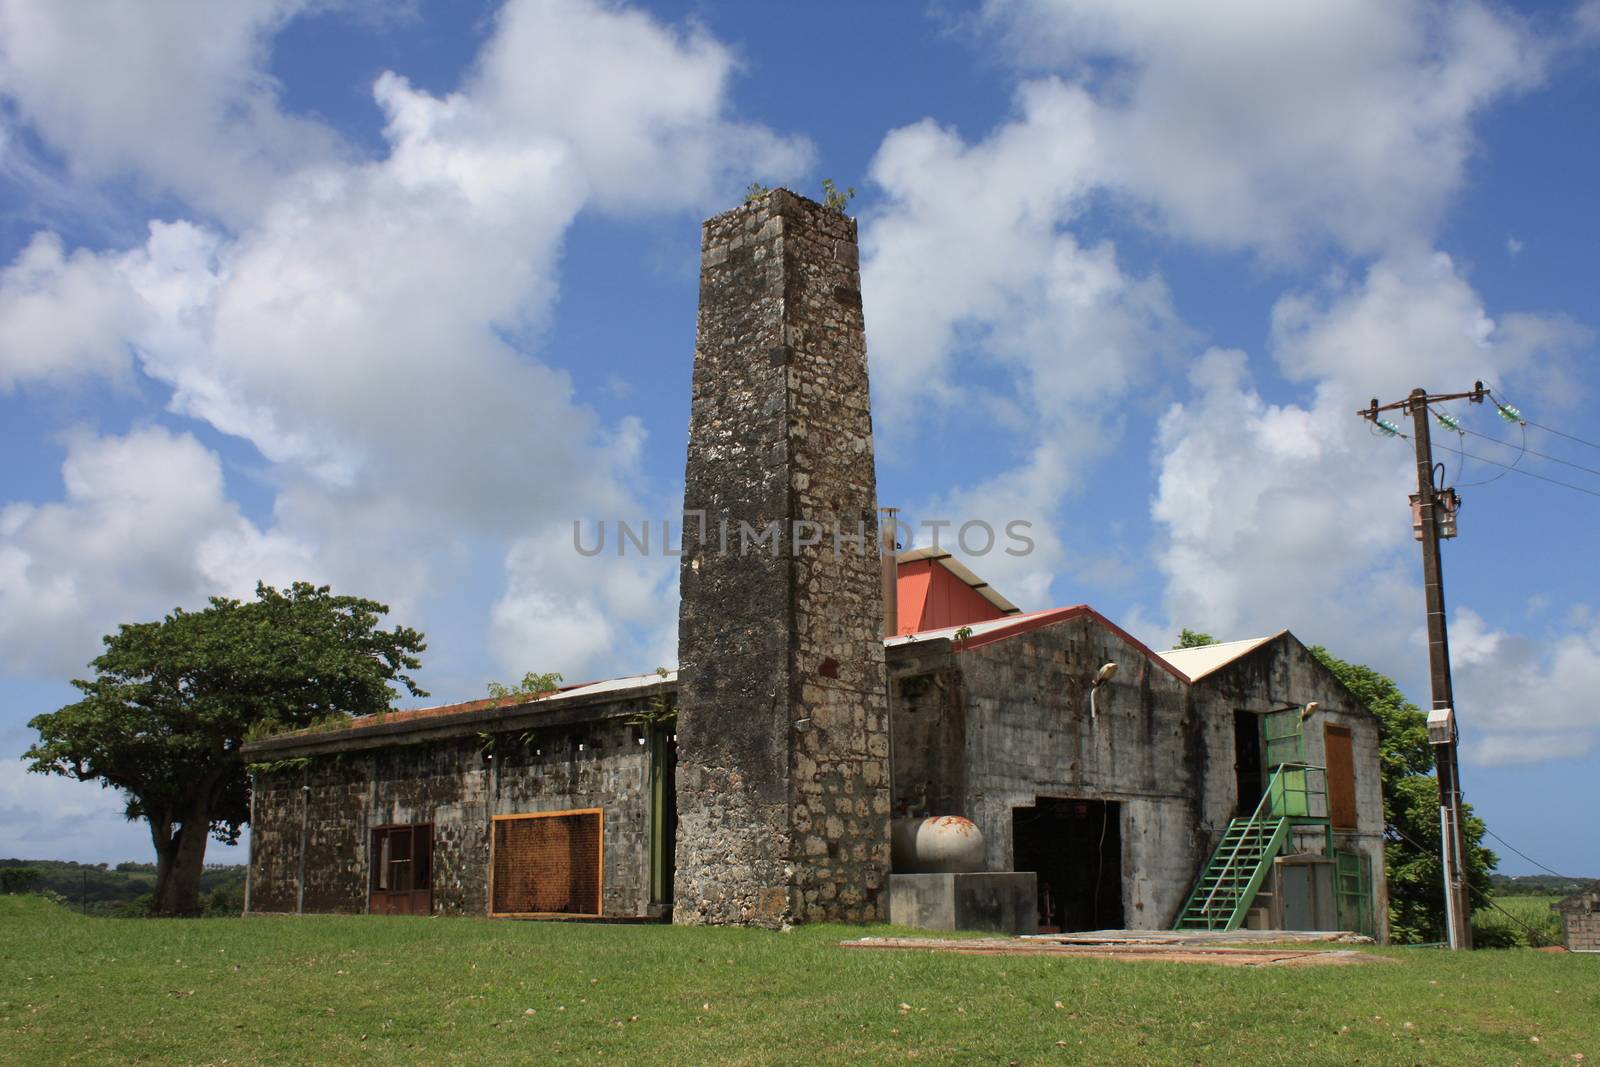 Abandoned rhum factory stands under the sun in Marie Galante